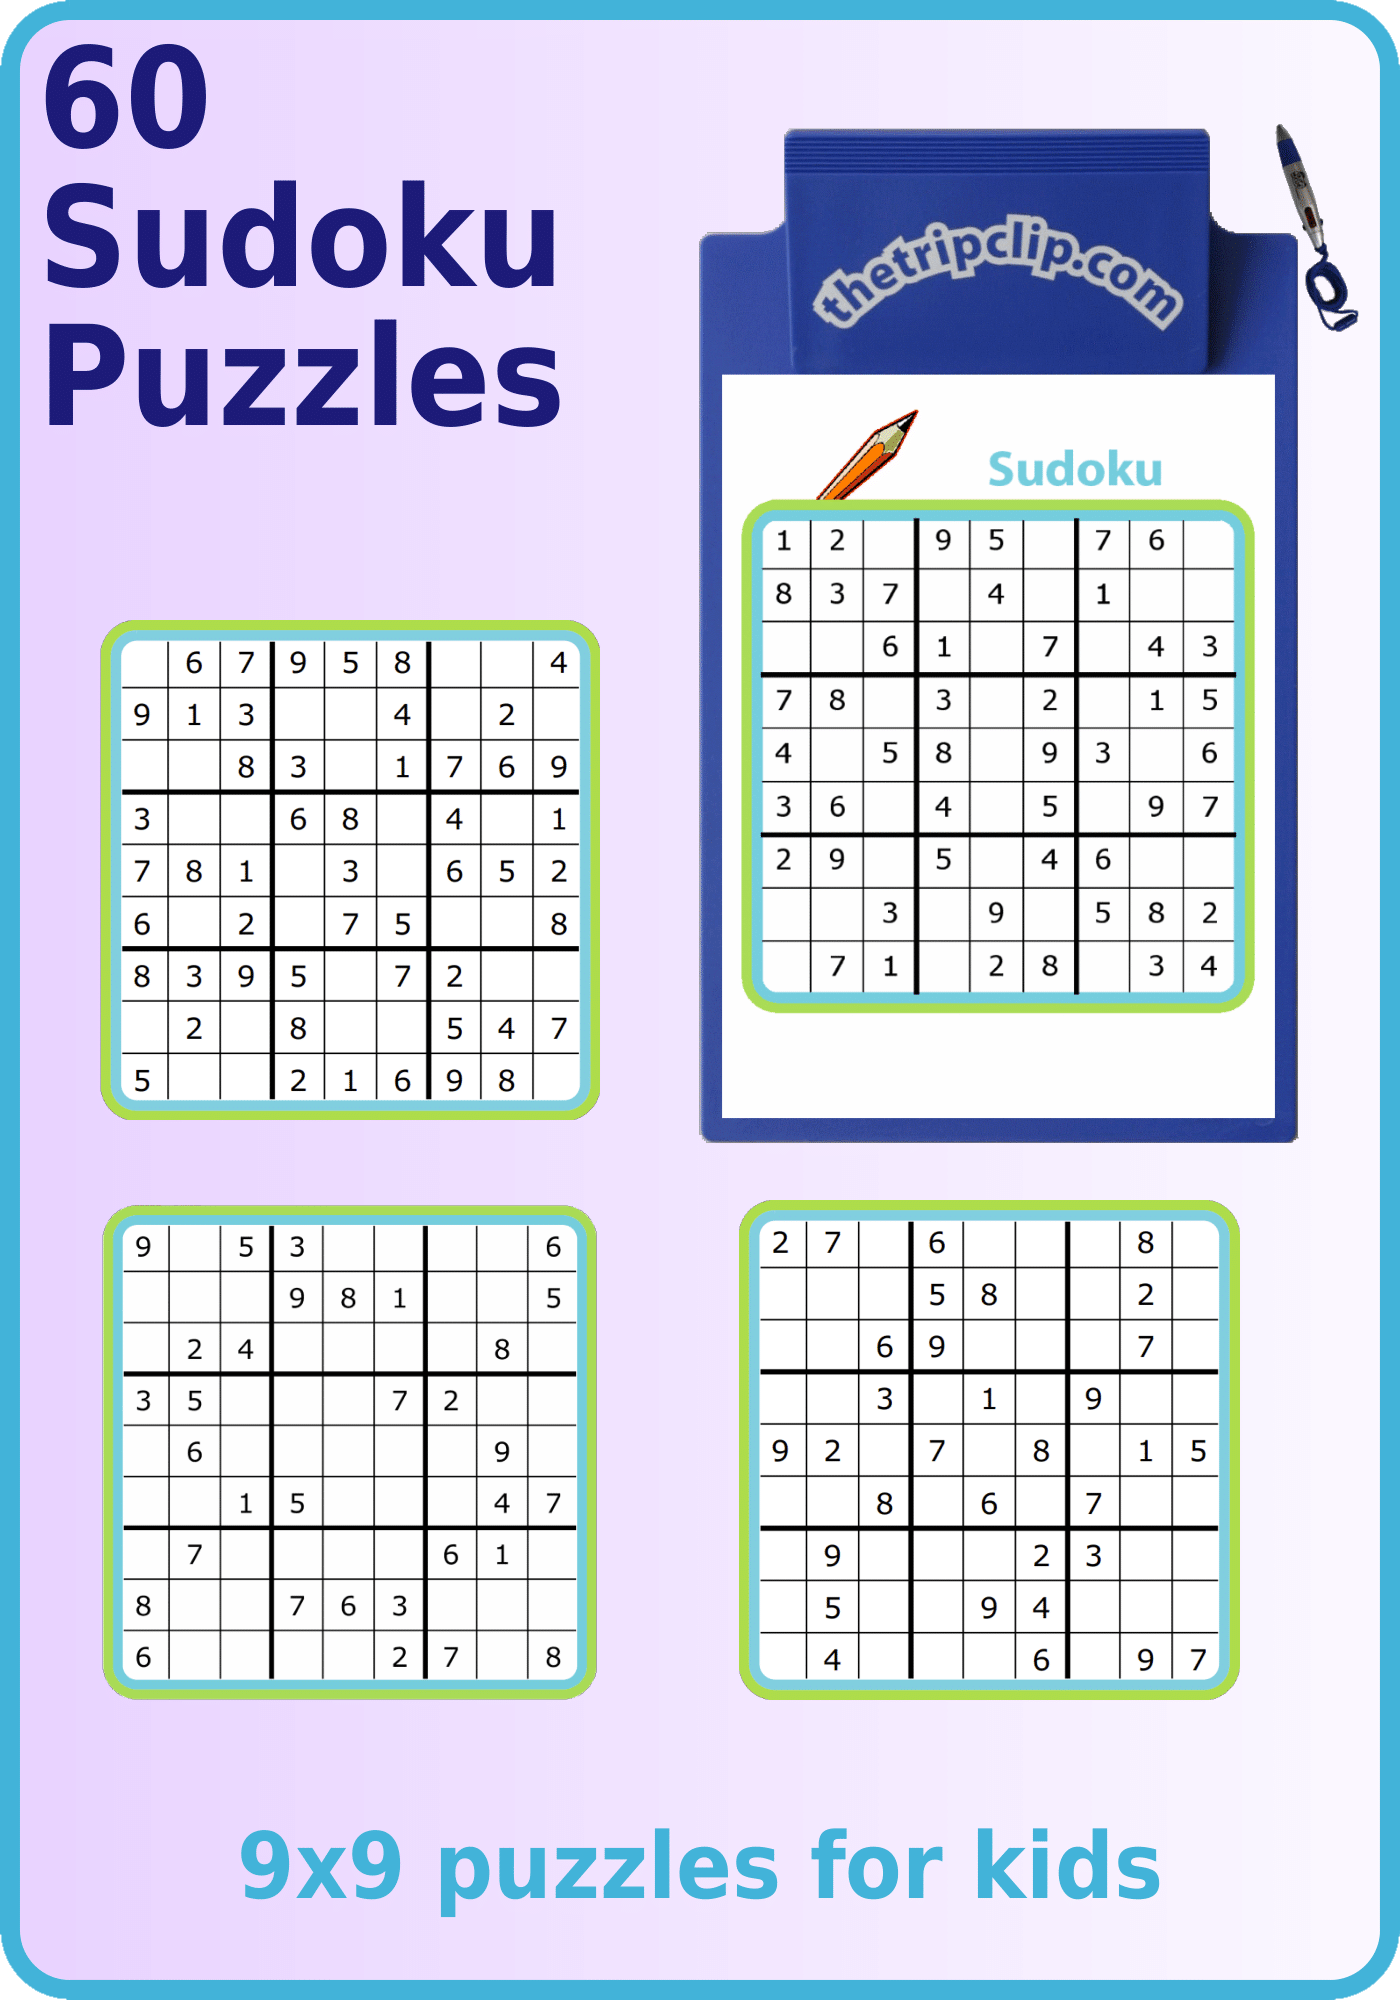 Four 9x9 sudoku puzzles, one on a kid-sized clipboards